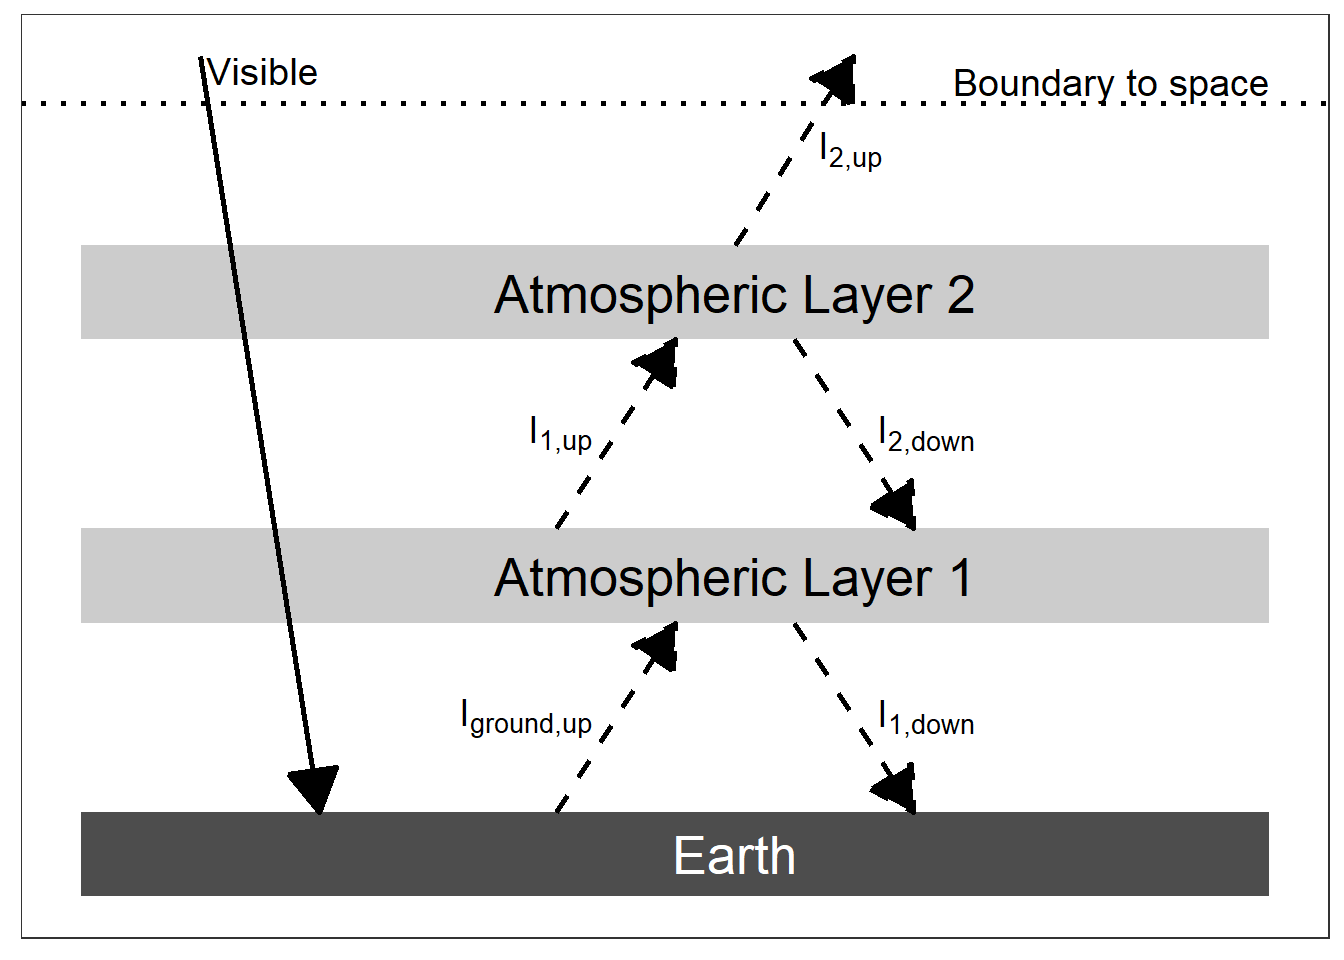 An energy diagram for a planet with two panes of glass for an atmosphere. The intensity of absorbed visible light is $(1 - \alpha) I_{solar} / 4$.